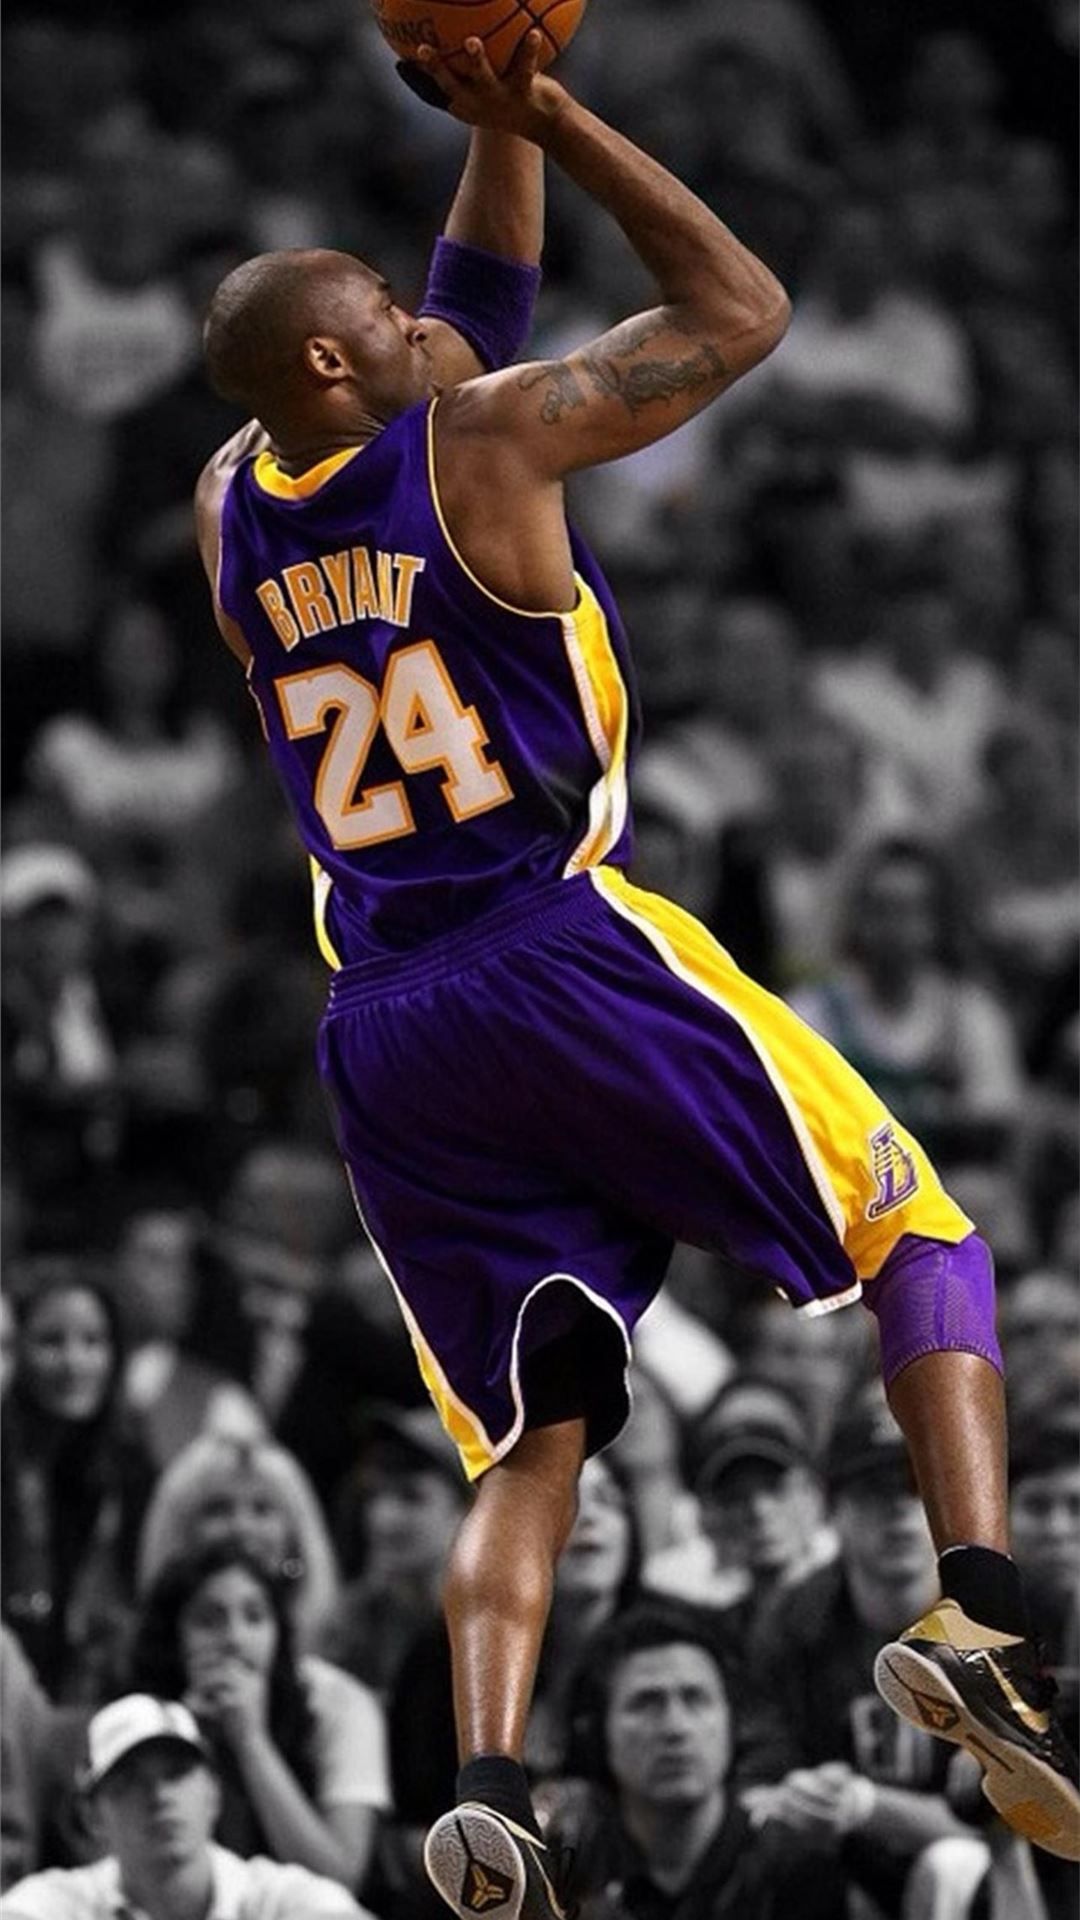 Free the NBA Super Star Brant Kobe Show beaty your. iPhone Wallpaper Free Download